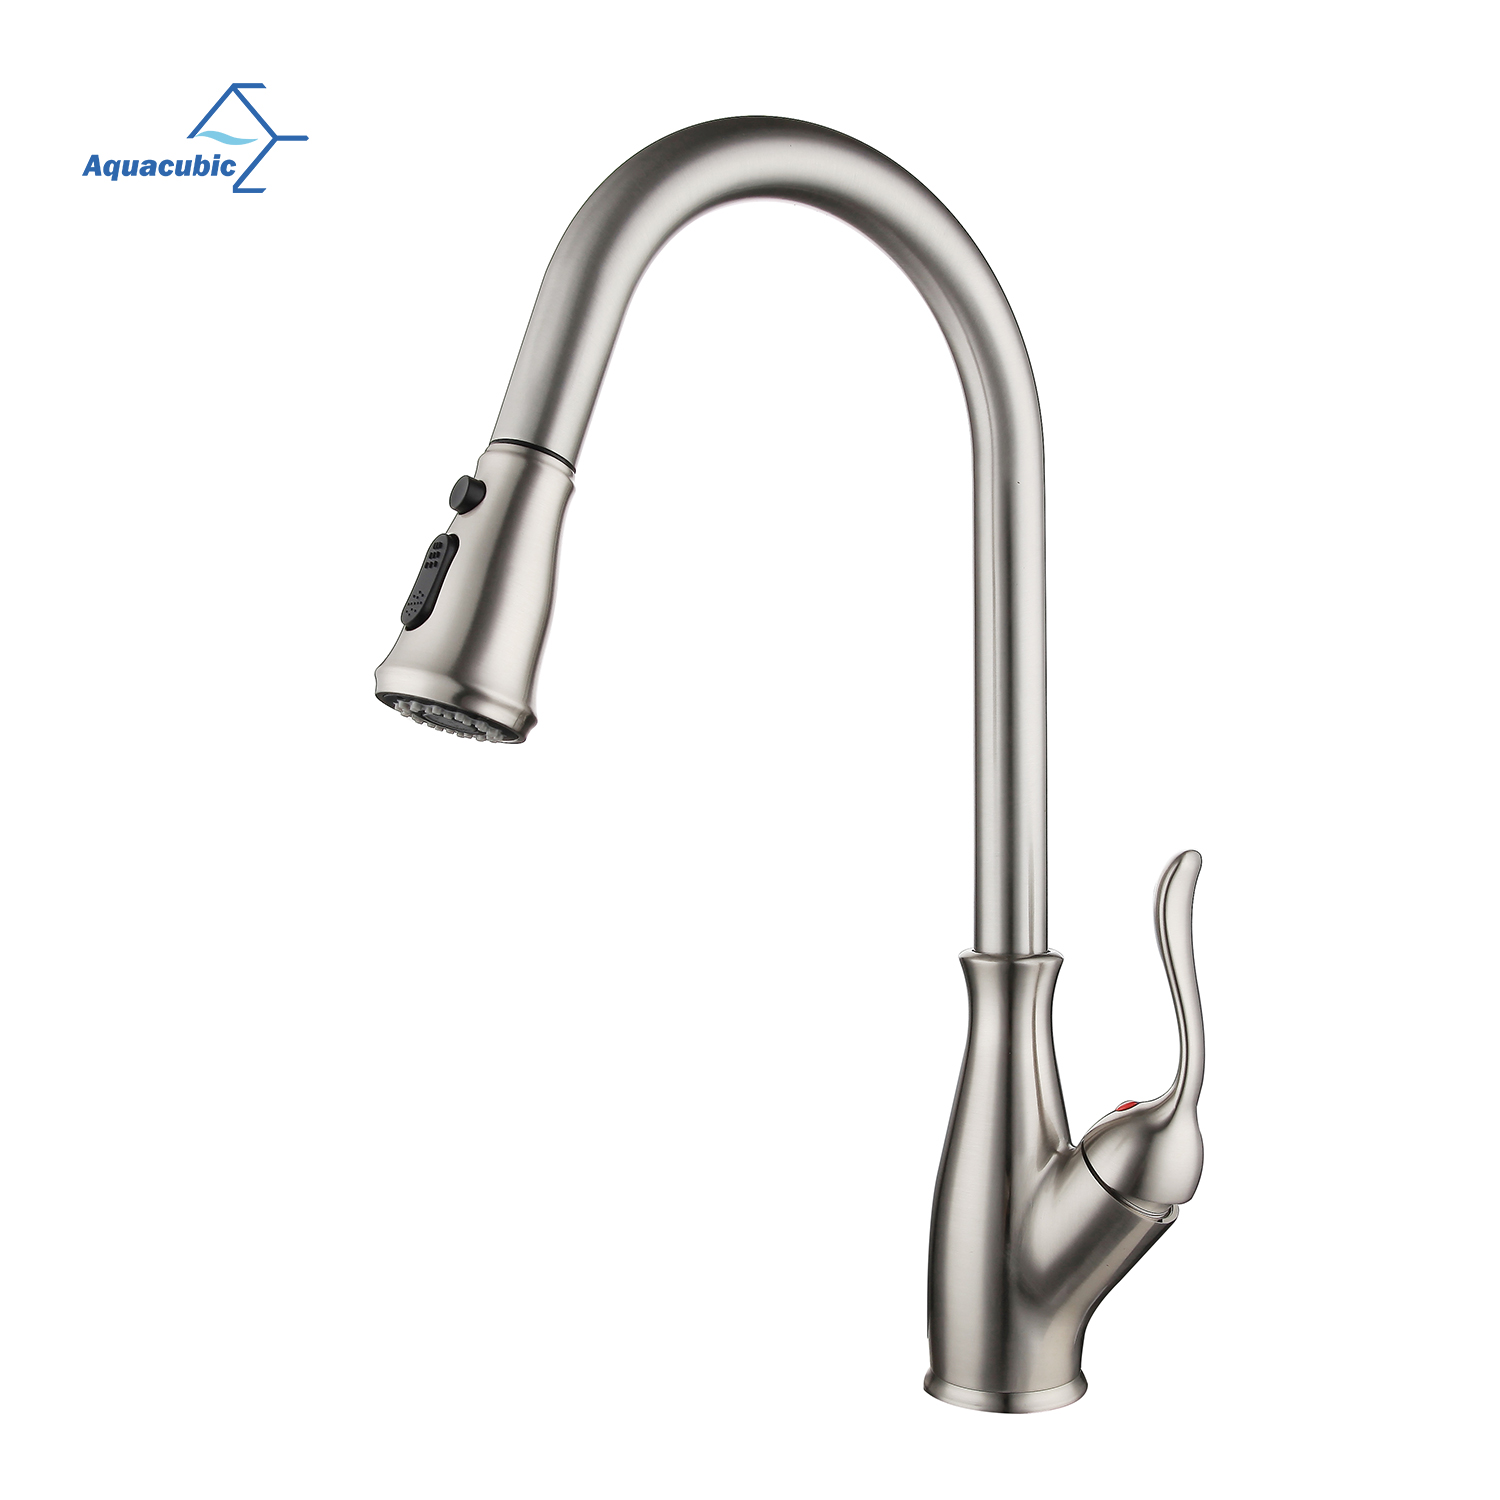  Aquacubic low lead cUPC Sanitair Contemporary Universal Pull Out Kitchen Kraan